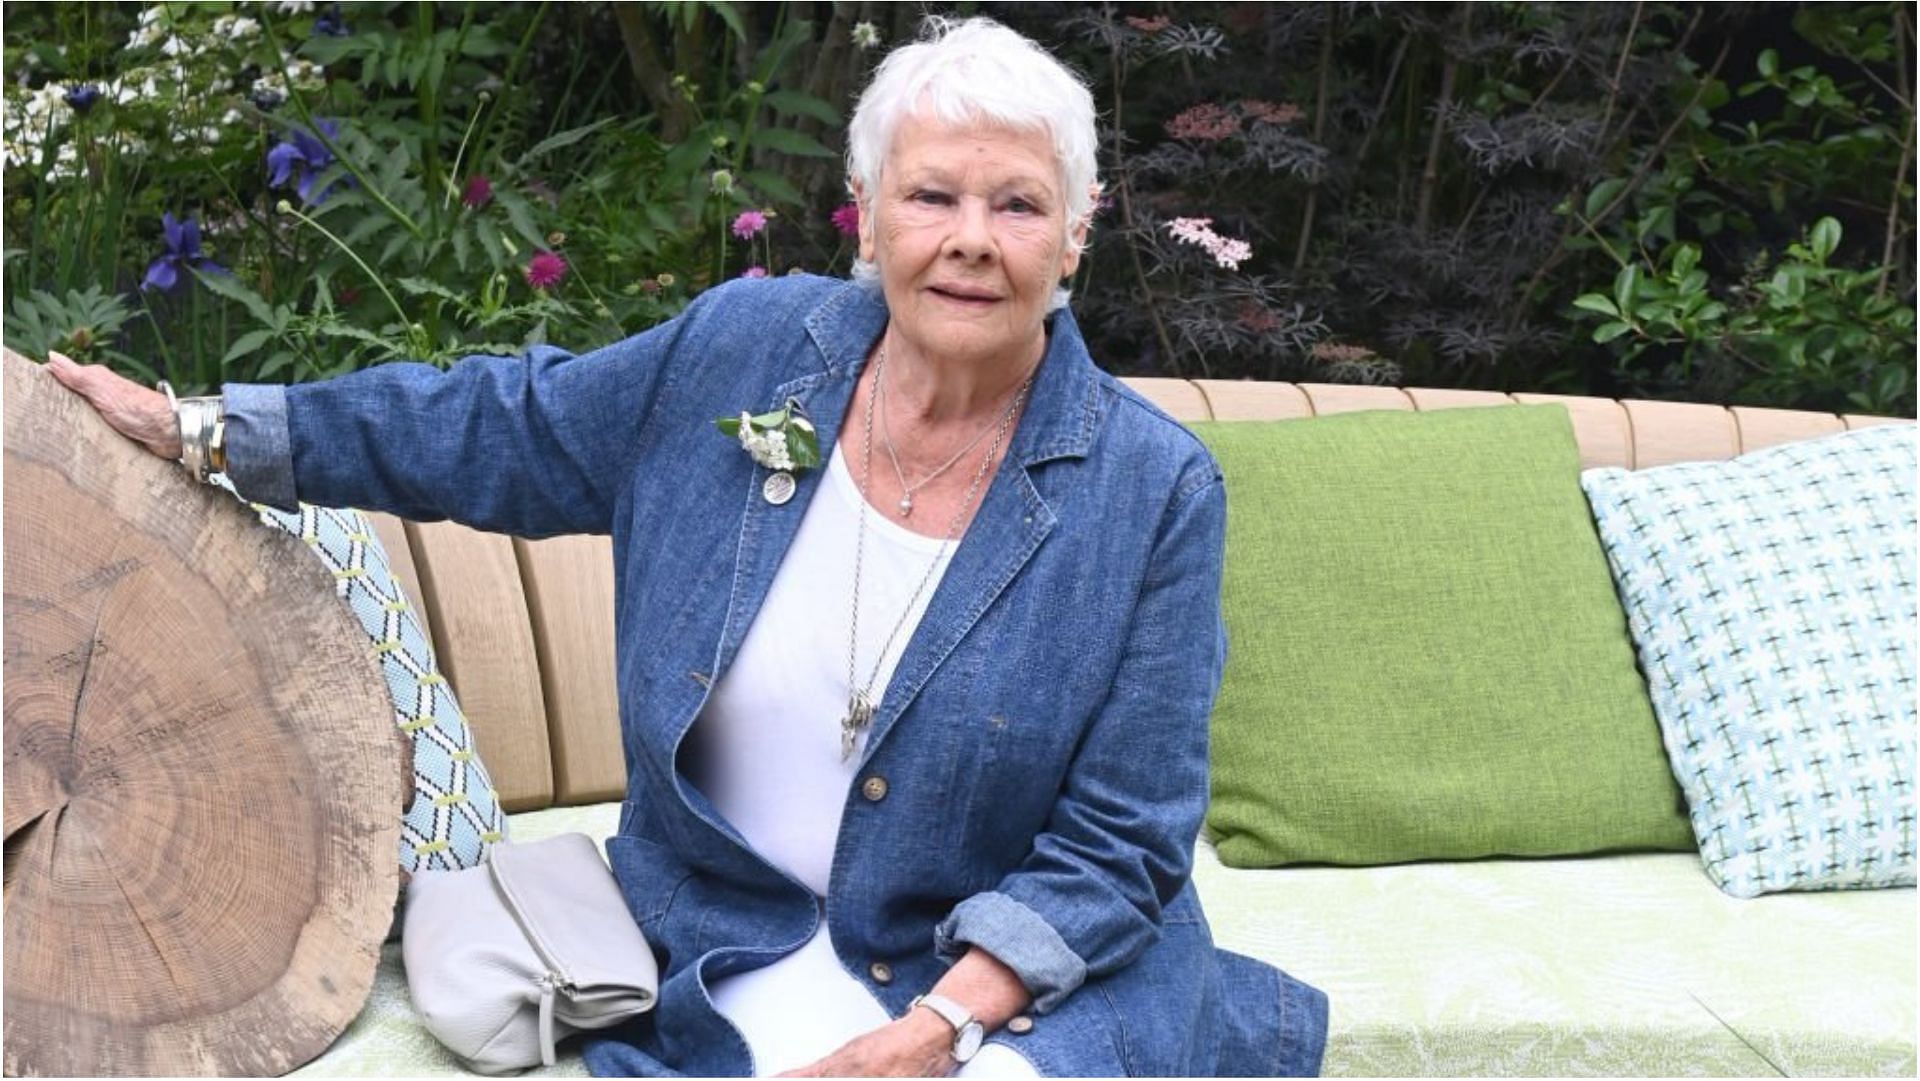 Judy Dench is having problems reading her lines after being diagnosed with macular degeneration (Image via David M. Benett/Getty Images)